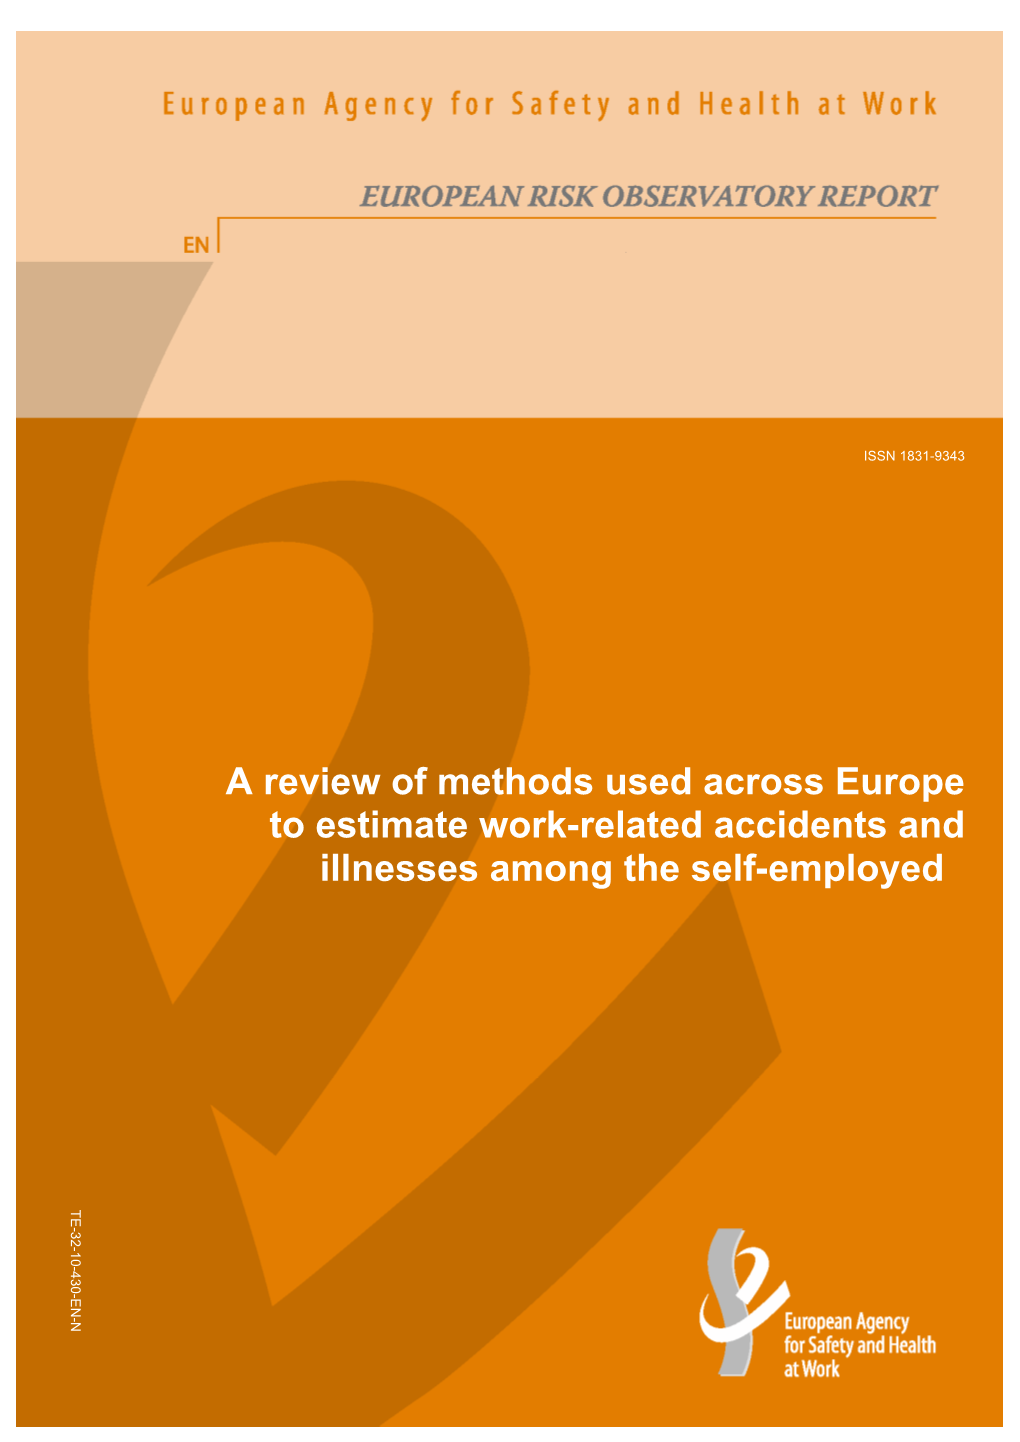 A Review of Methods Used Across Europe to Estimate Work-Related Accidents and Illnesses Among the Self-Employed